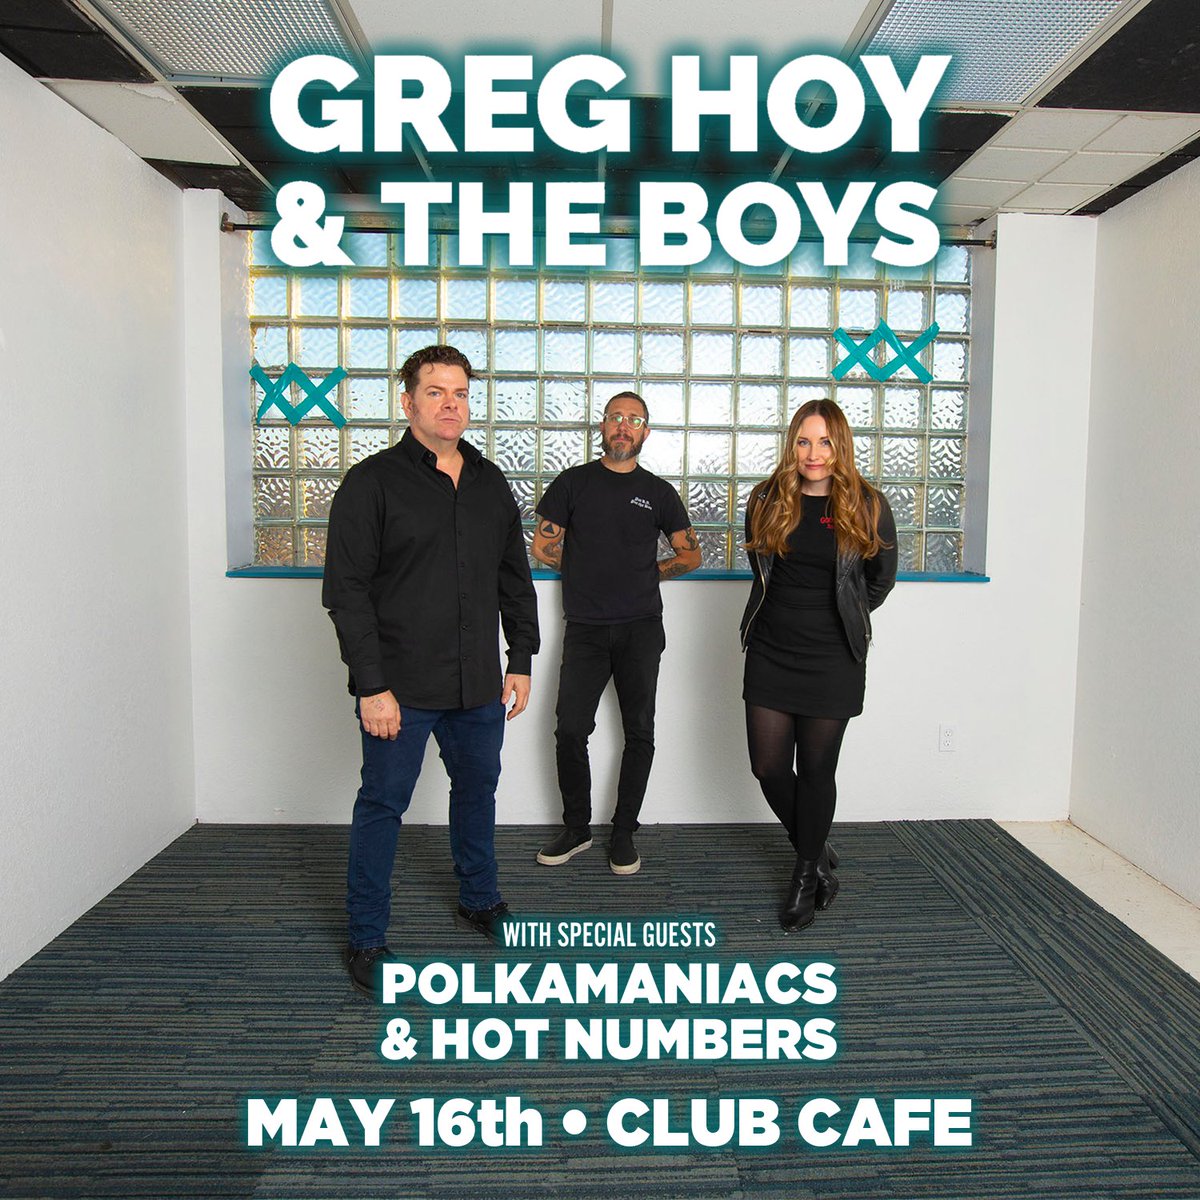 📣🗓 NEW SHOW 🗓📣

@ClubCafeLive | 05/16 | @thegreghoy with special guest @polkamaniacs & #HotNumbers! 

🎟 On Sale 02/29 10AM via: tinyurl.com/59mmmyuu 

#opusonepgh #pittsburgh #greghoy #greghoyandtheboys #clubcafe #clubcafelive #indie #pghlocal #localartist